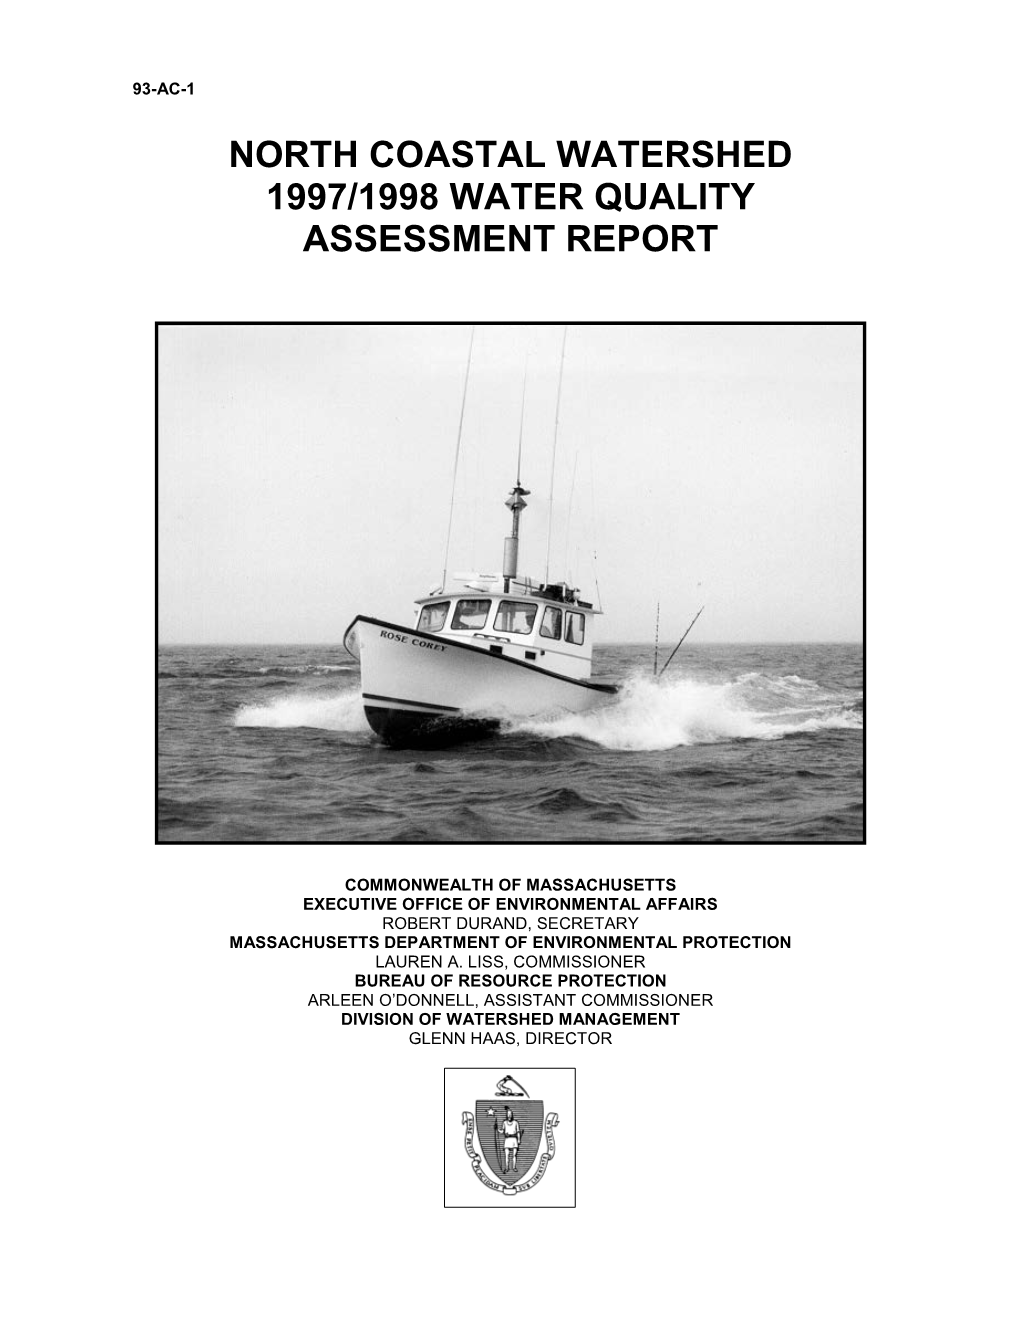 North Coastal Watershed 1997/1998 Water Quality Assessment Report